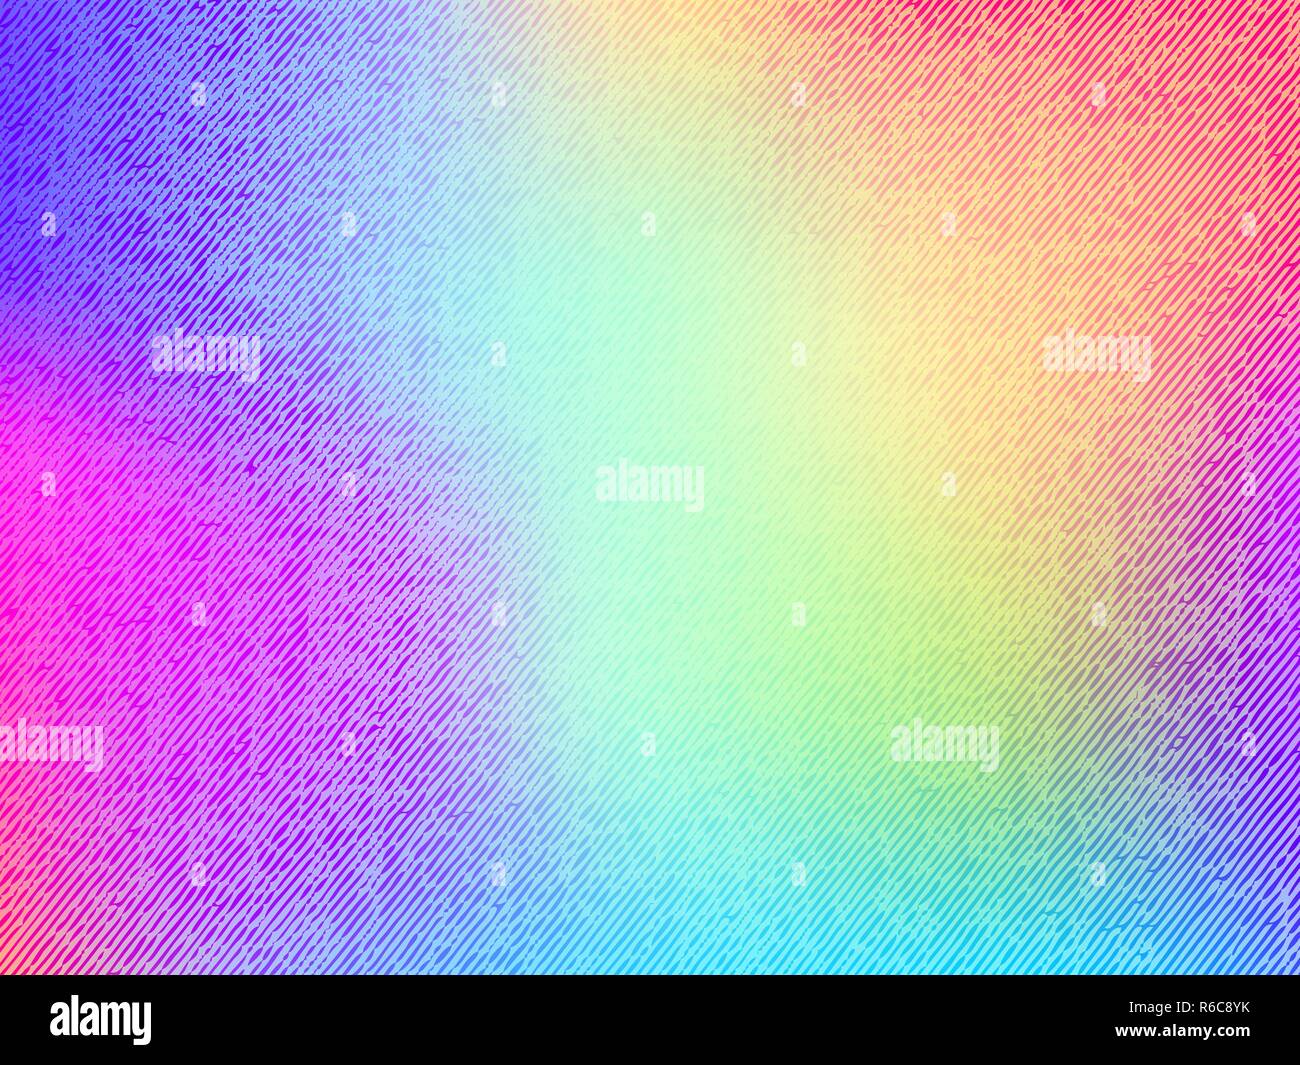 Colorful smooth banner template with denim texture Stock Vector